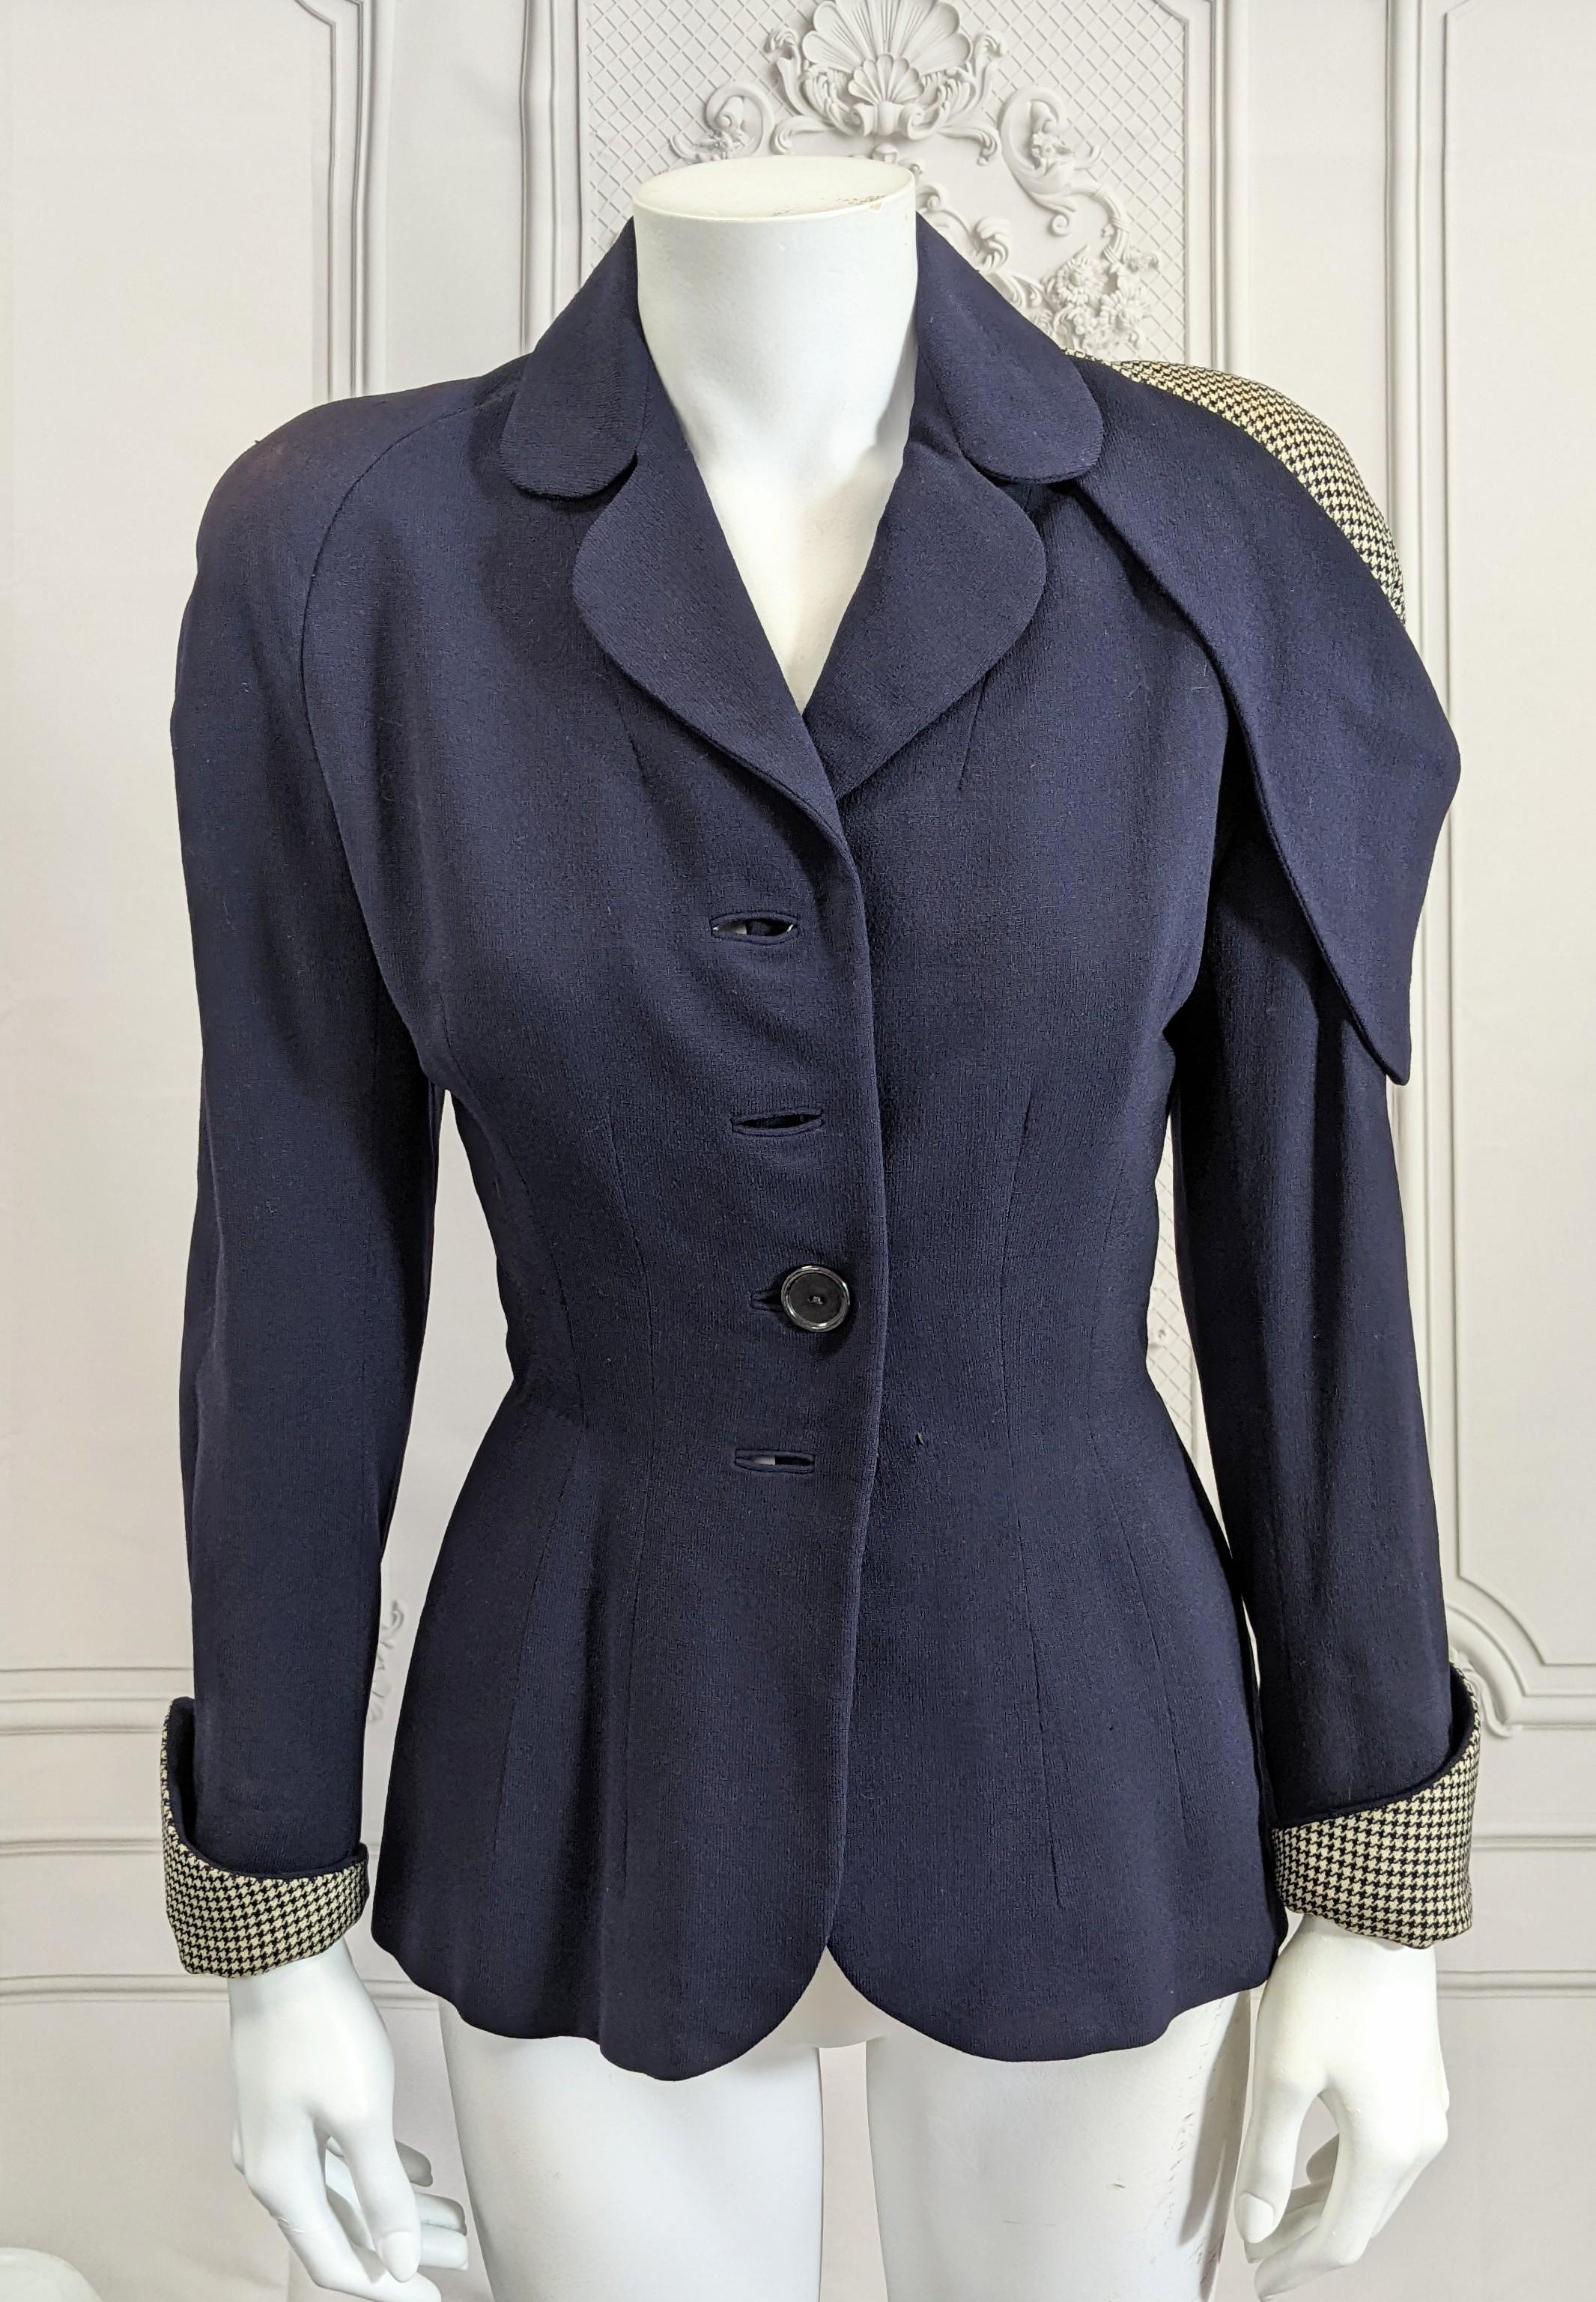 Unusual Wool Cold Shoulder Houndstooth Jacket from the 1940's. Navy wool worsted with a strong exposed shoulder which is covered in houndstooth wool with matching cuffs. Tiny waist with padded hips and self buttons. Small size. Mannequin is size